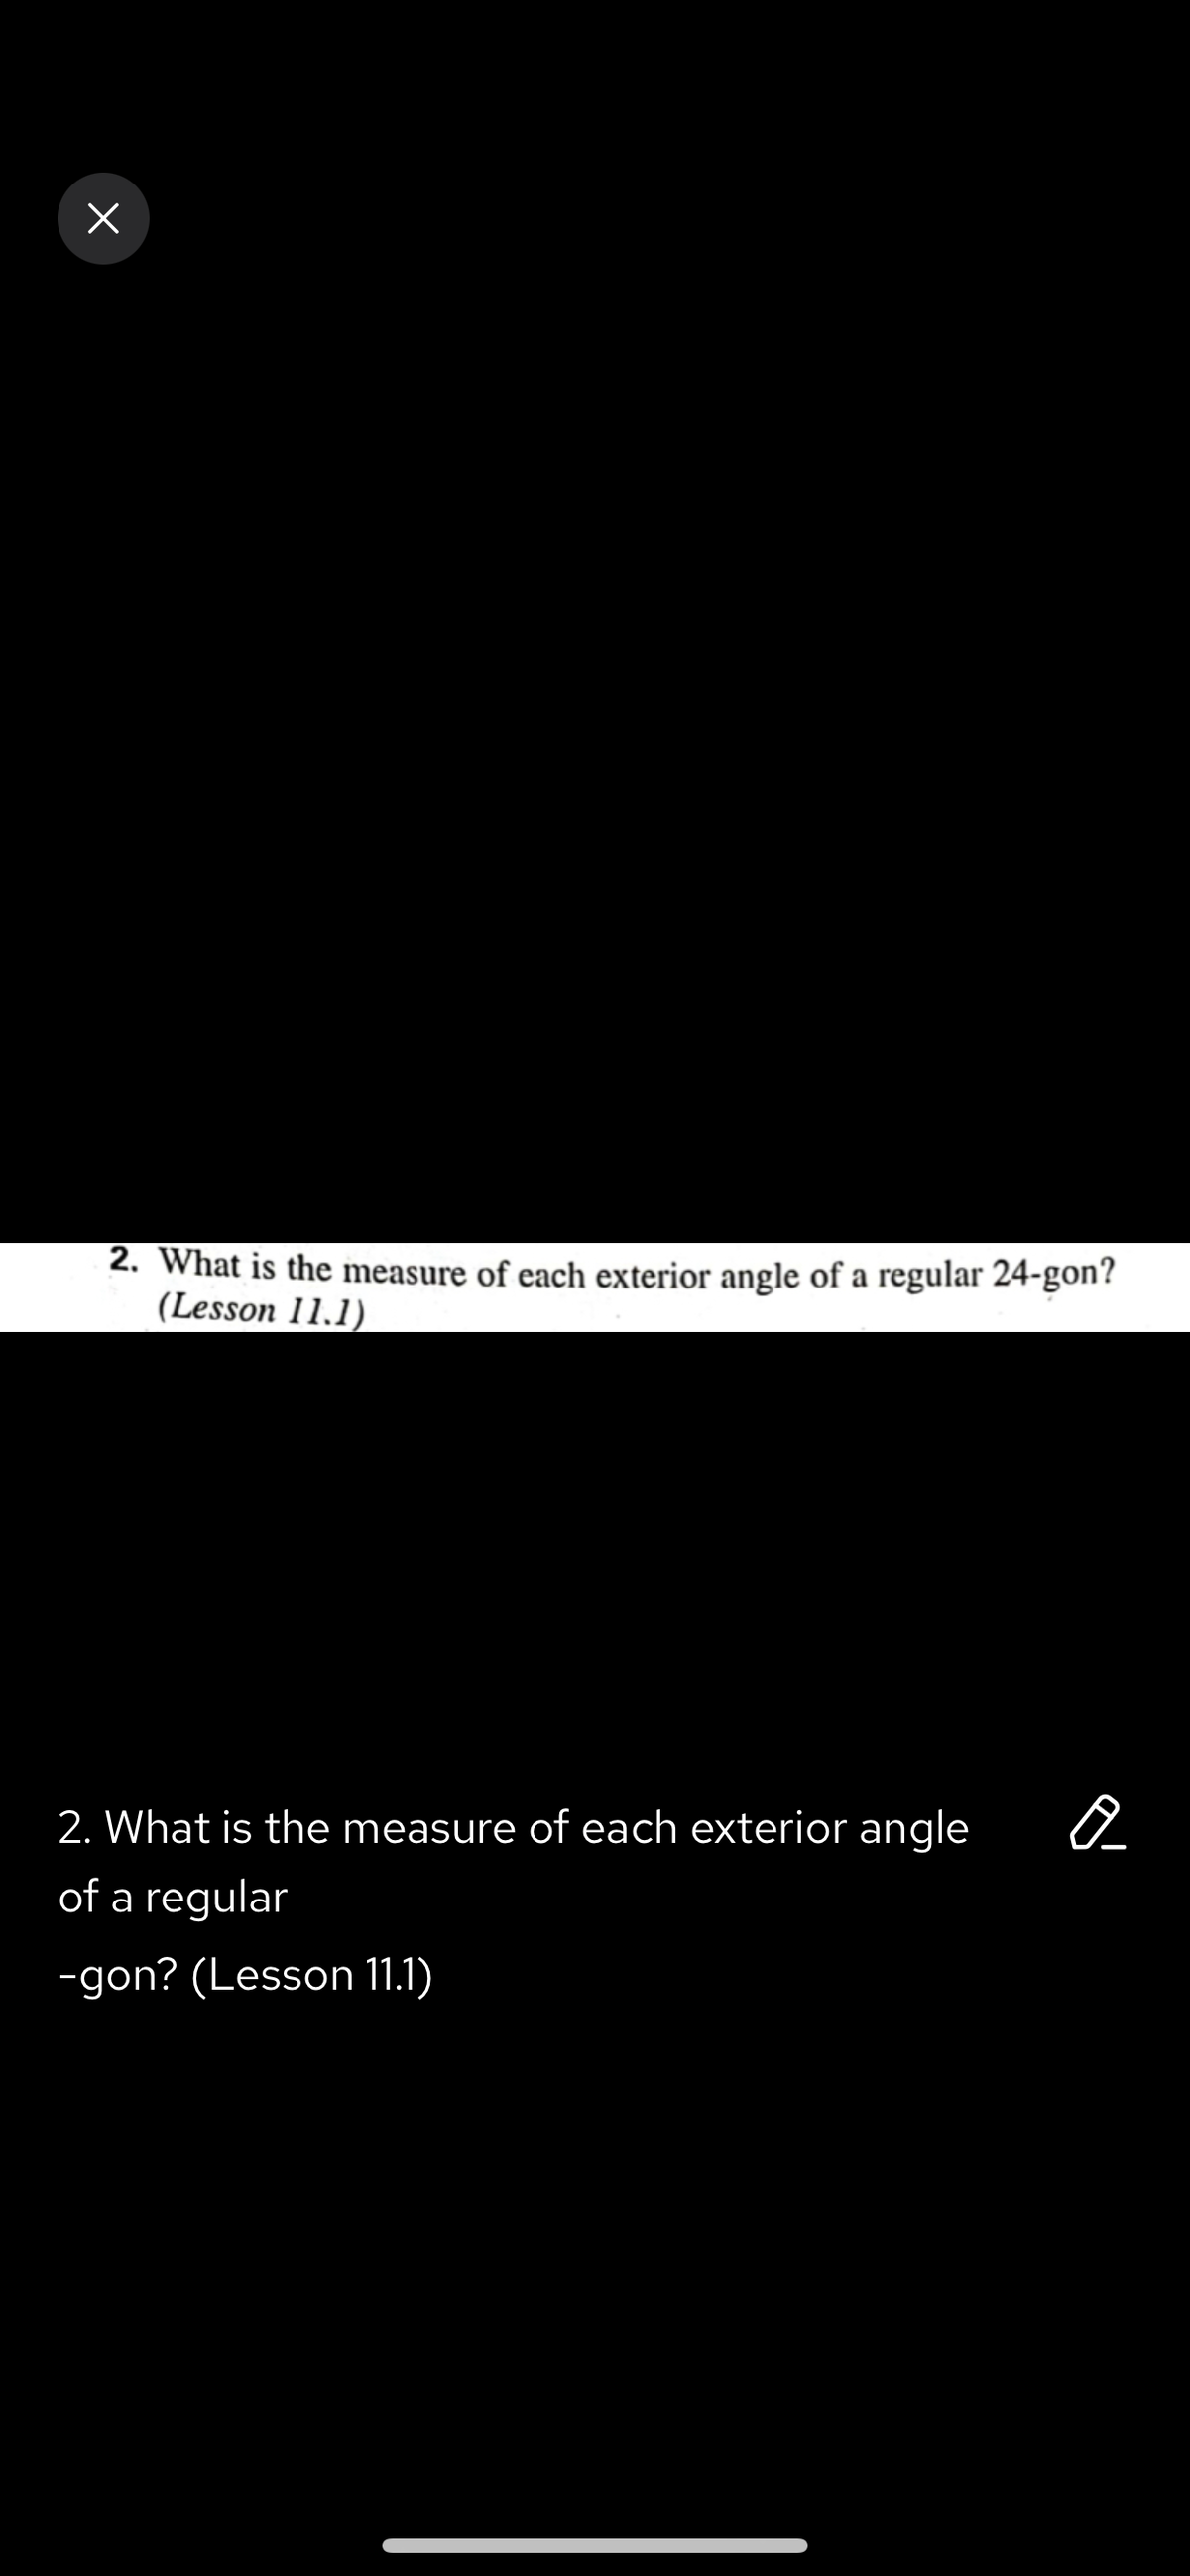 ×
2. What is the measure of each exterior angle of a regular 24-gon?
(Lesson 11.1)
o
2. What is the measure of each exterior angle
of a regular
-gon? (Lesson 11.1)